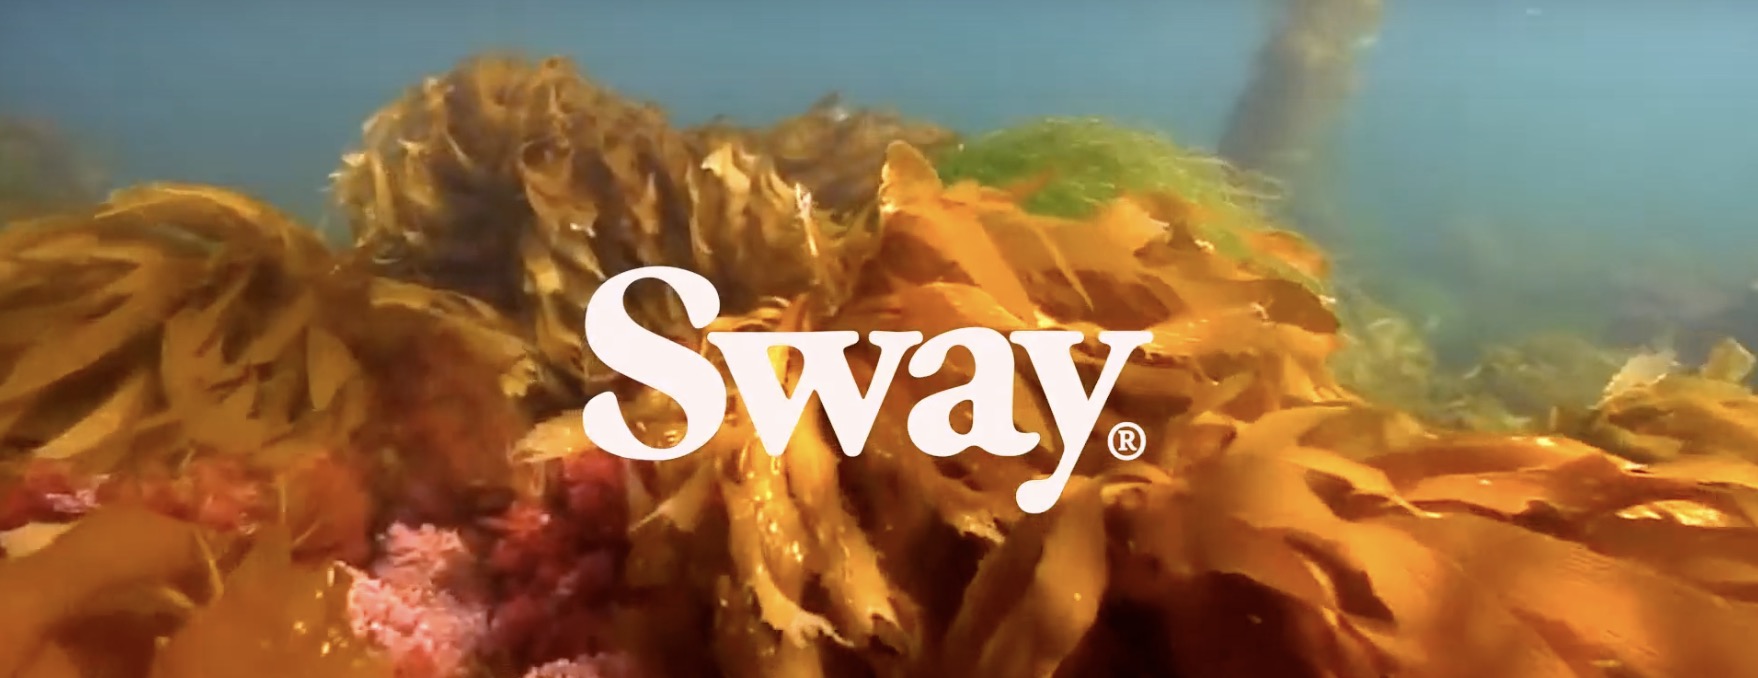 seaweed with Sway title on top